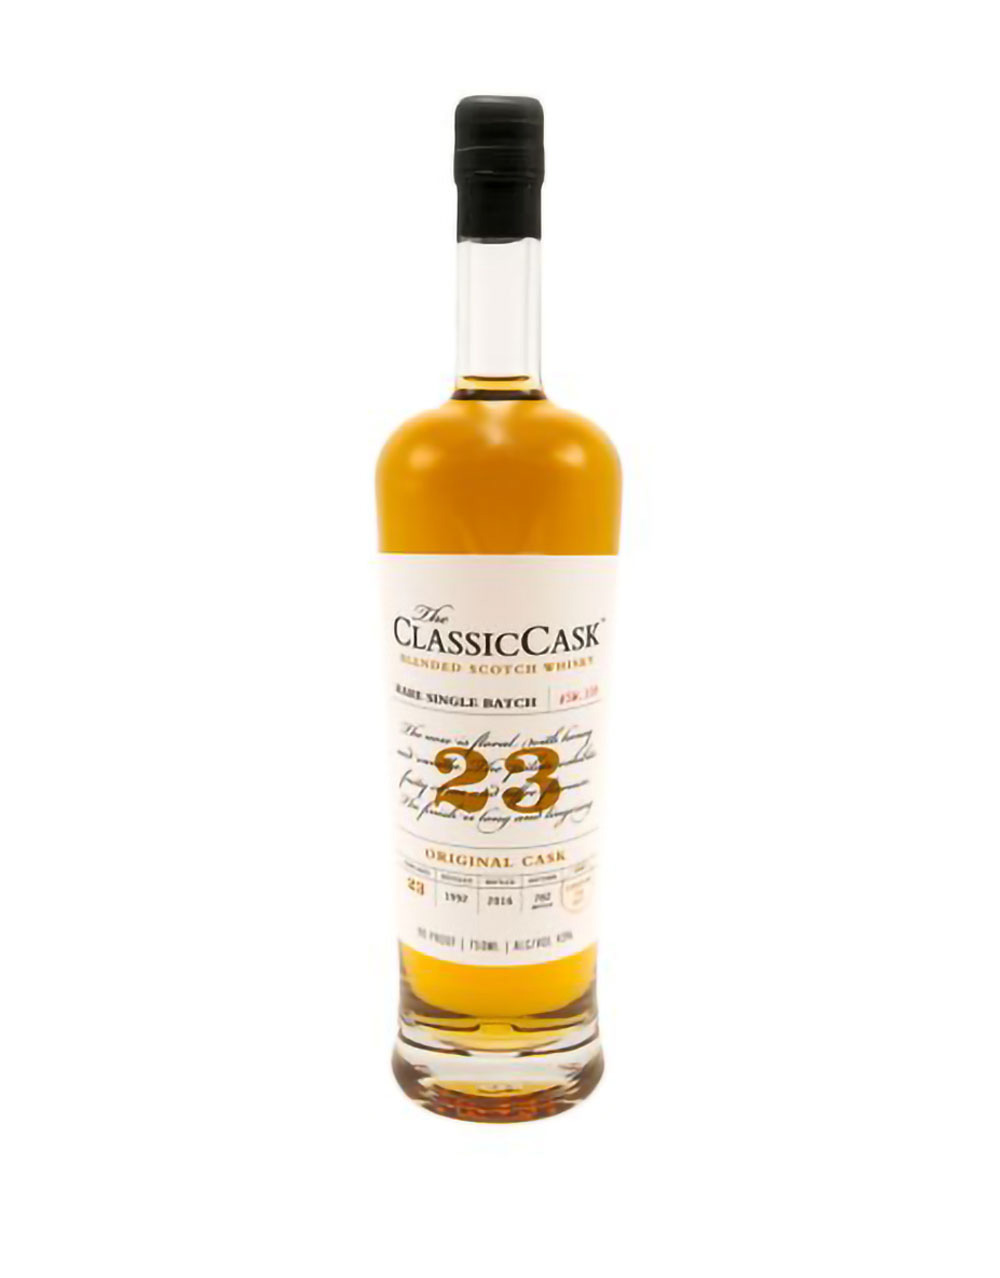 The Classic Cask 23 Year Old Original Cask Blended Scotch Whisky